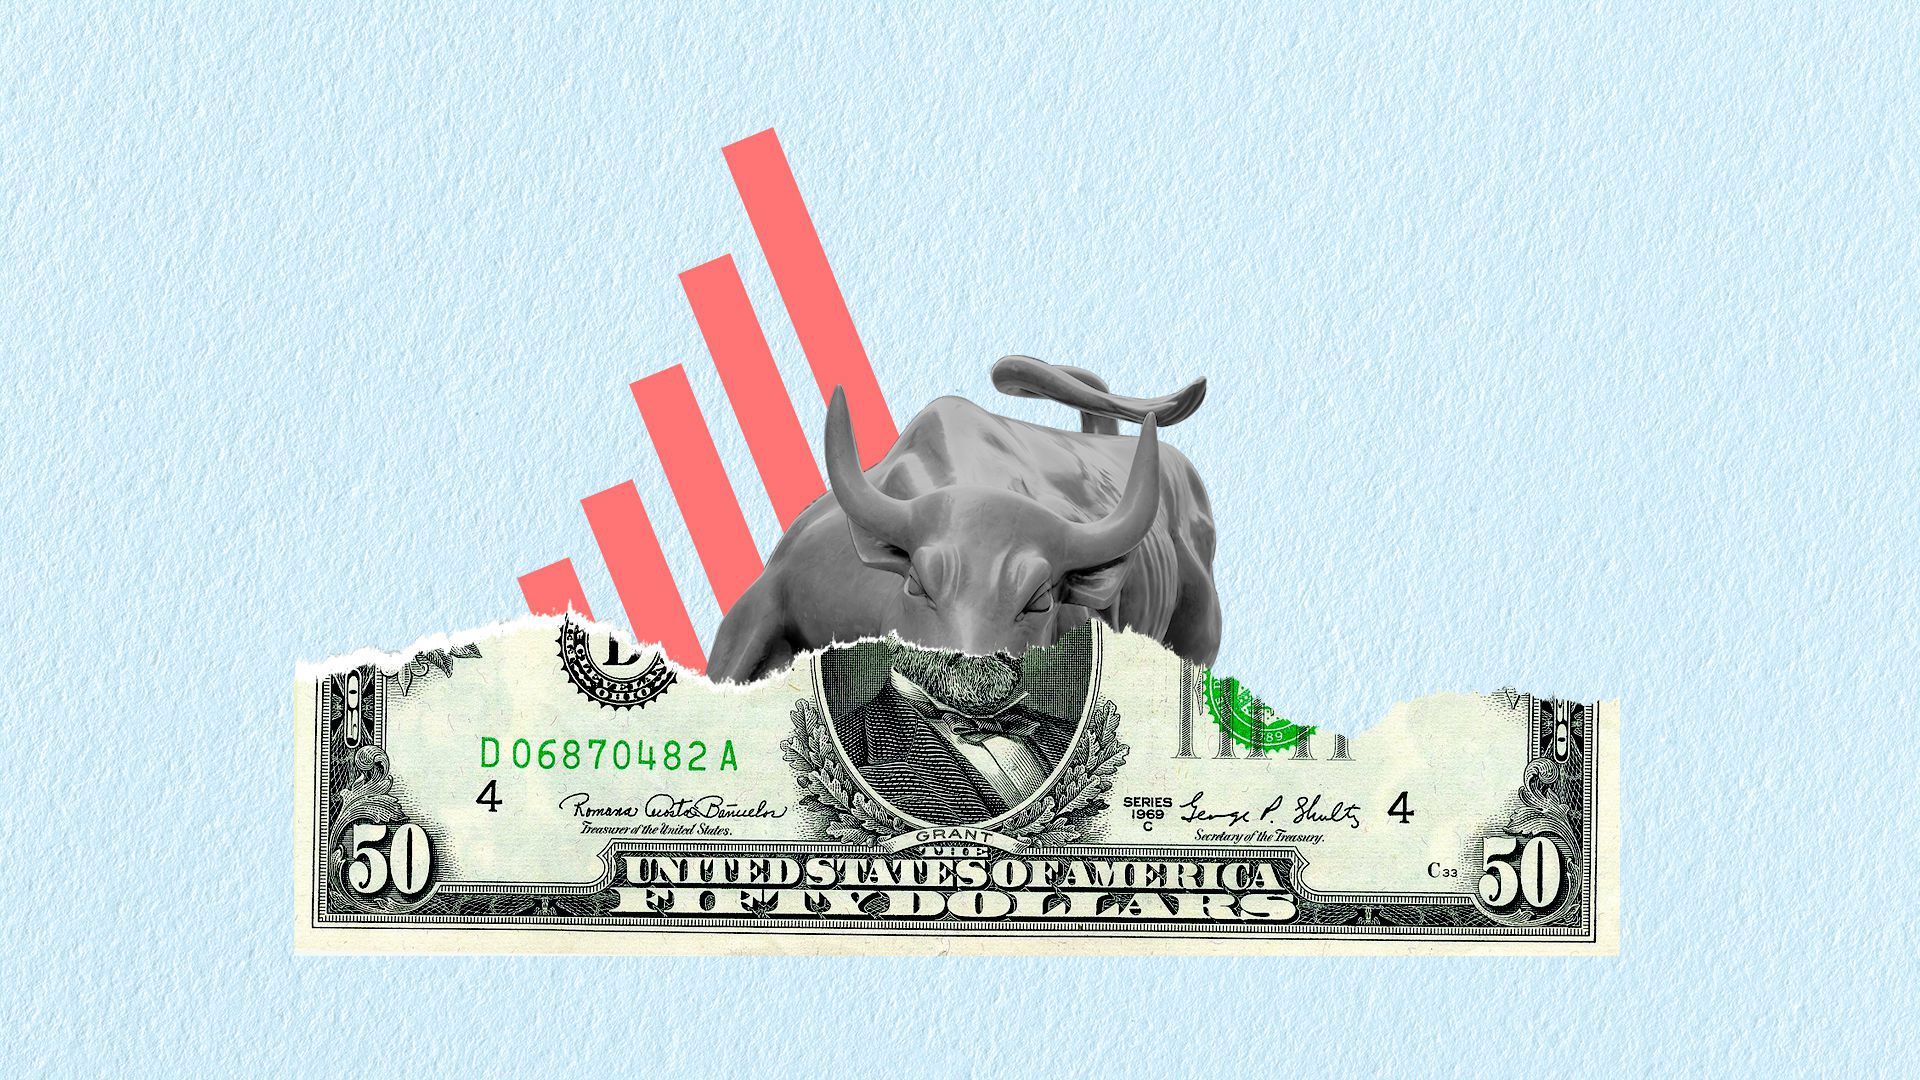 Illustration of the Wall Street bull hiding behind a ripped $50 bill